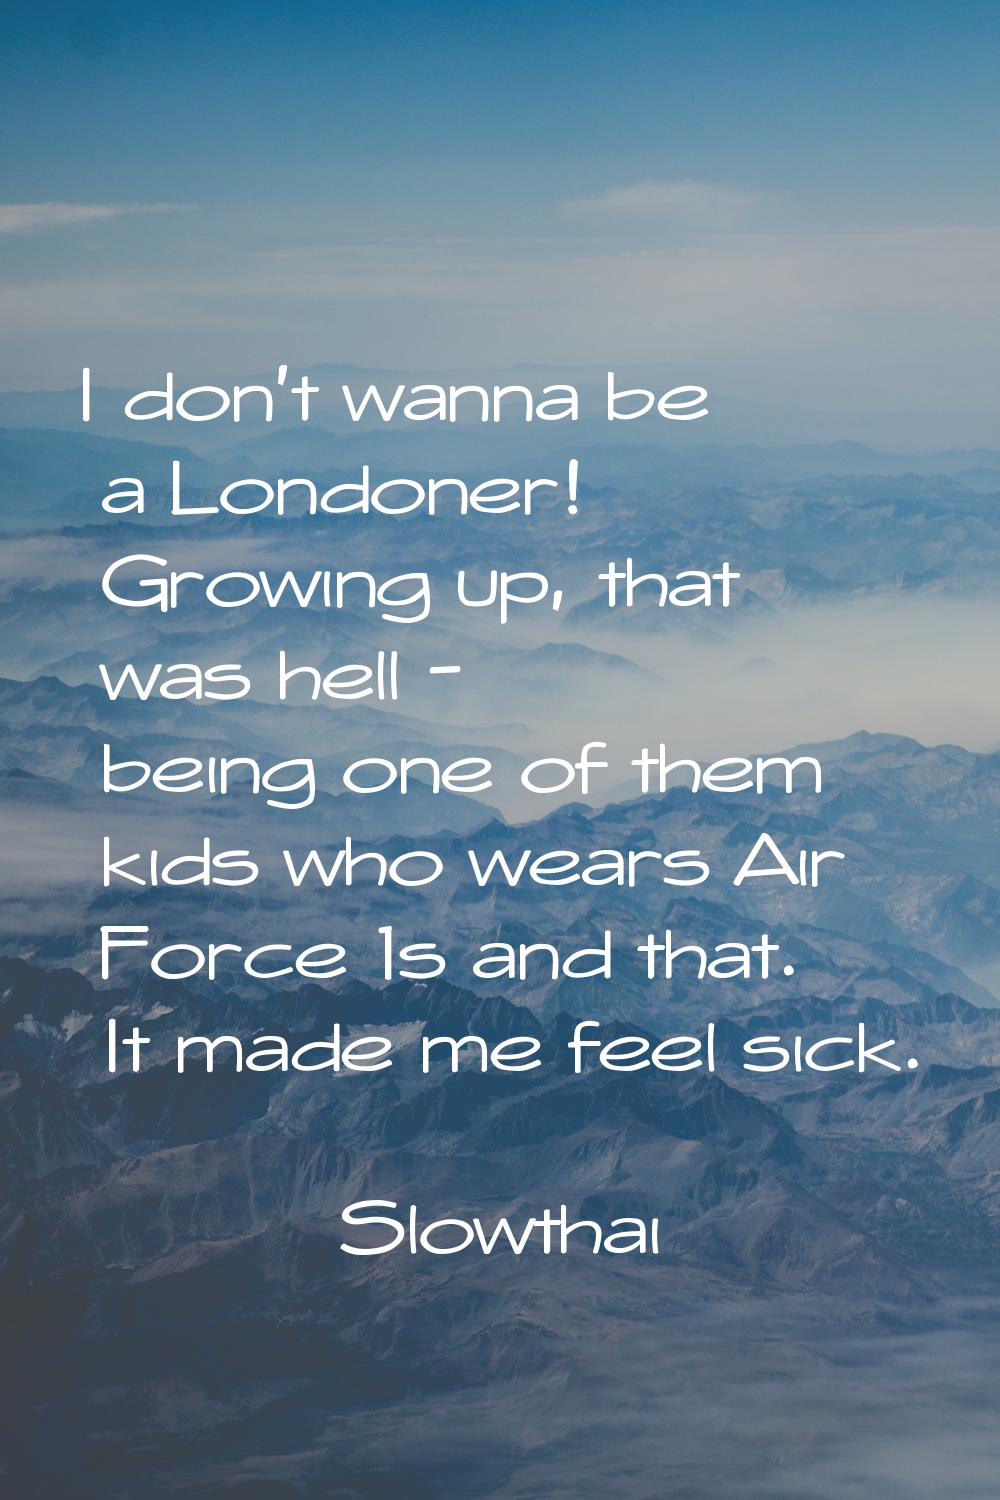 I don't wanna be a Londoner! Growing up, that was hell - being one of them kids who wears Air Force